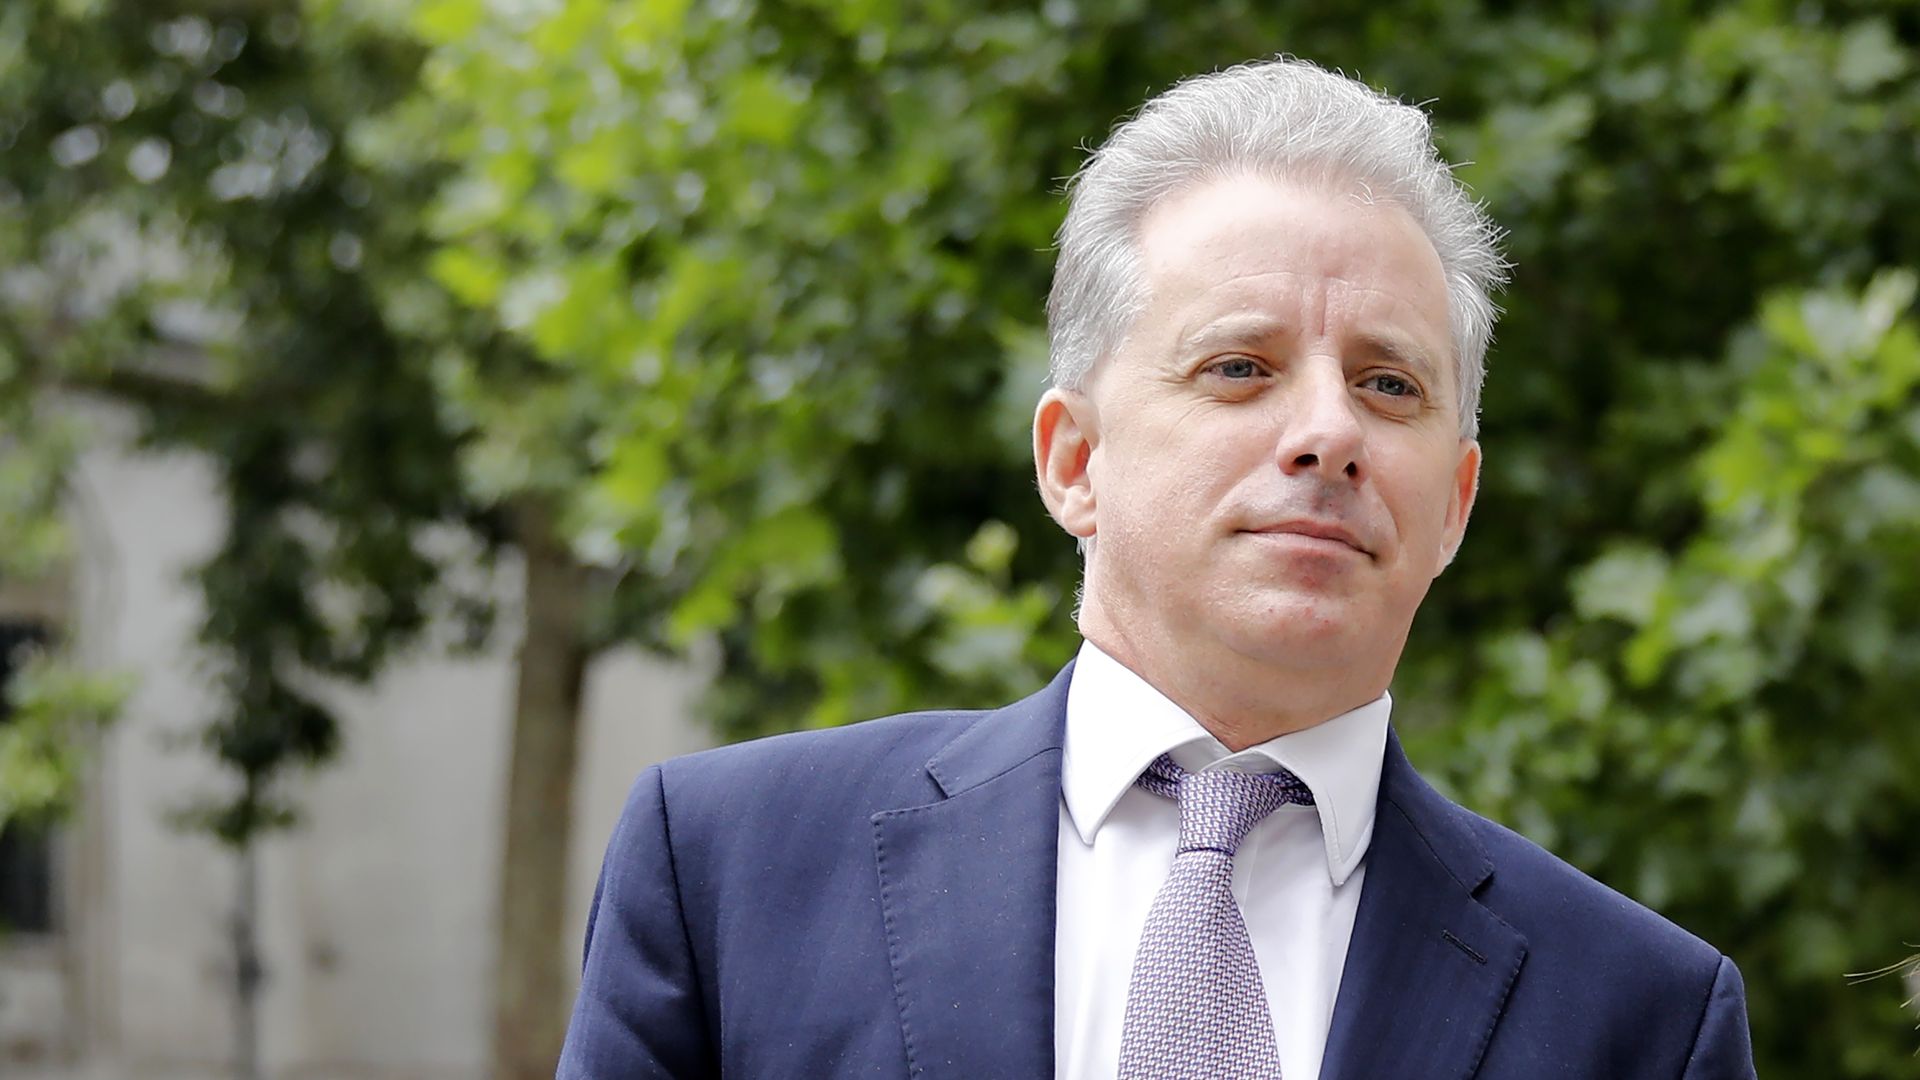 ormer UK intelligence officer Christopher Steele arrives at the High Court in London on July 24, 2020